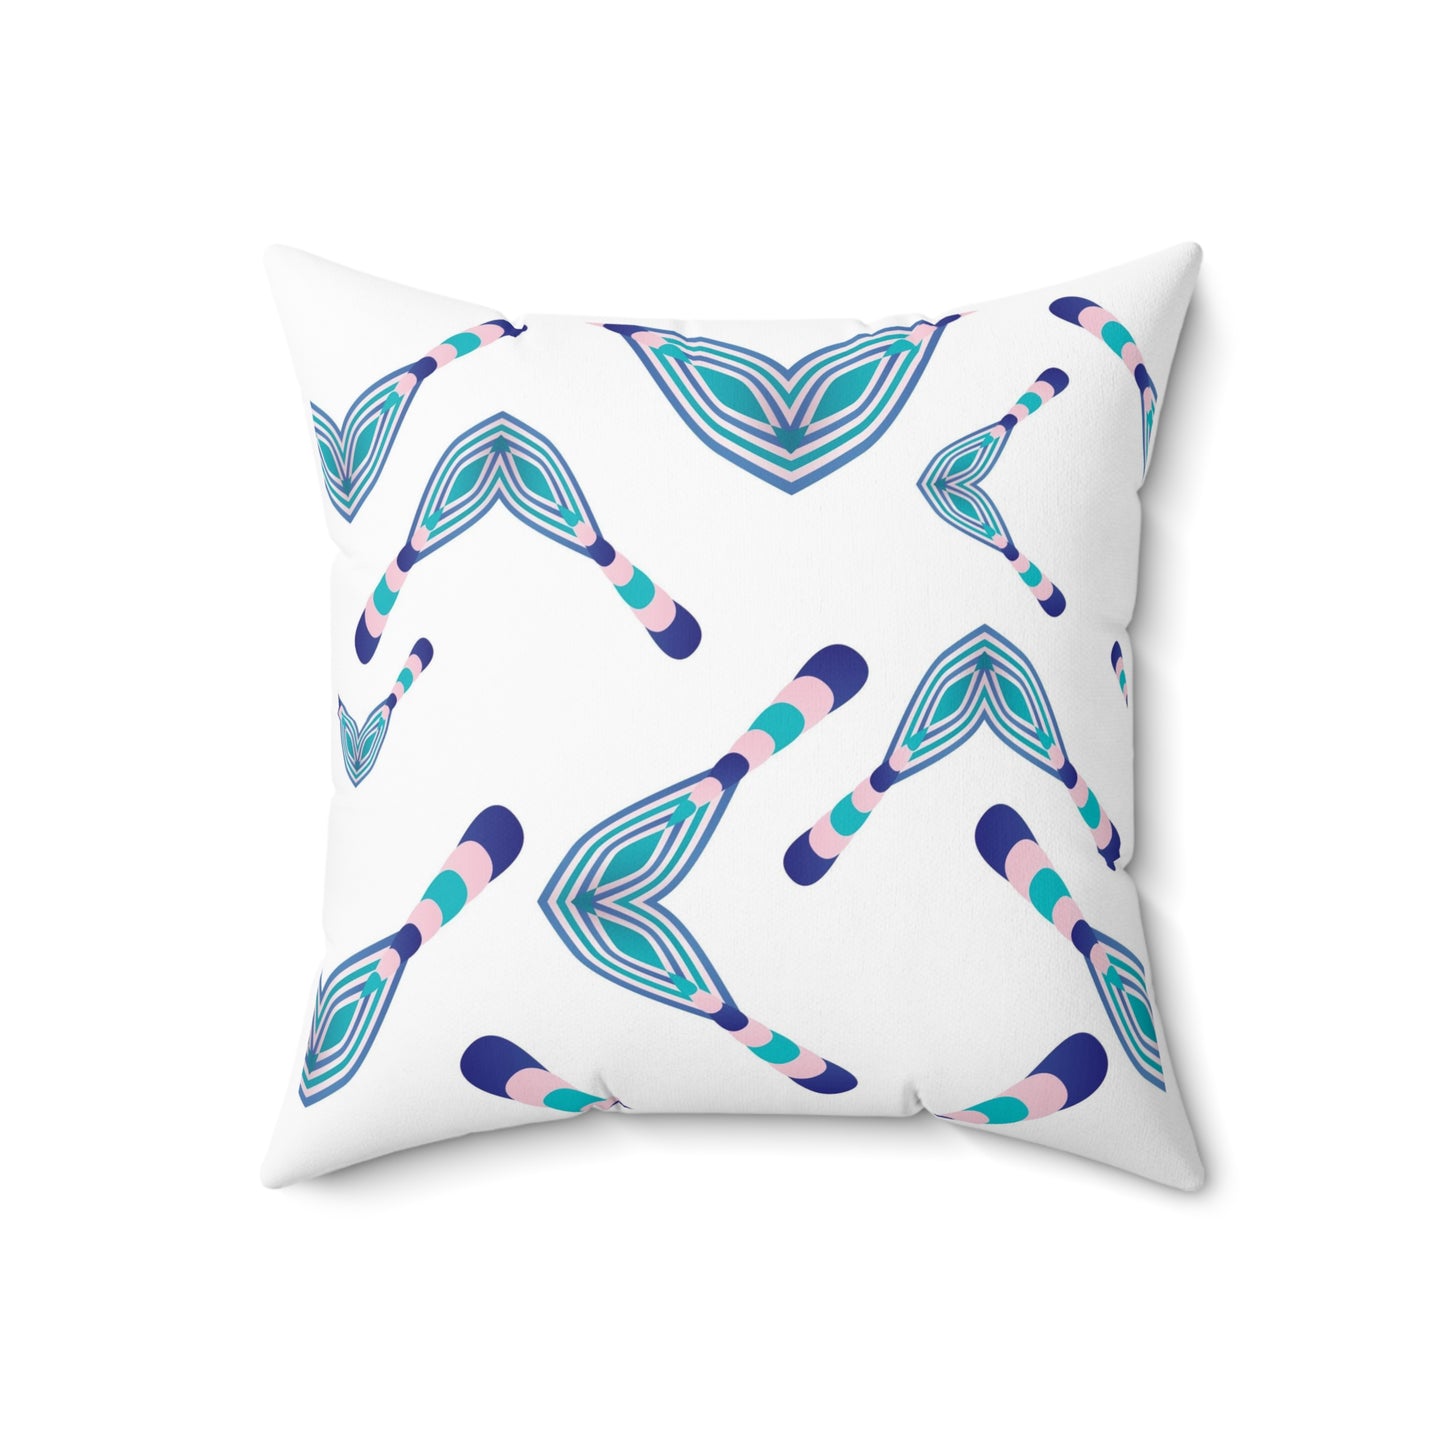 Spun Polyester Square Pillow Kukloso Abstractical No 21 - Free Shipping